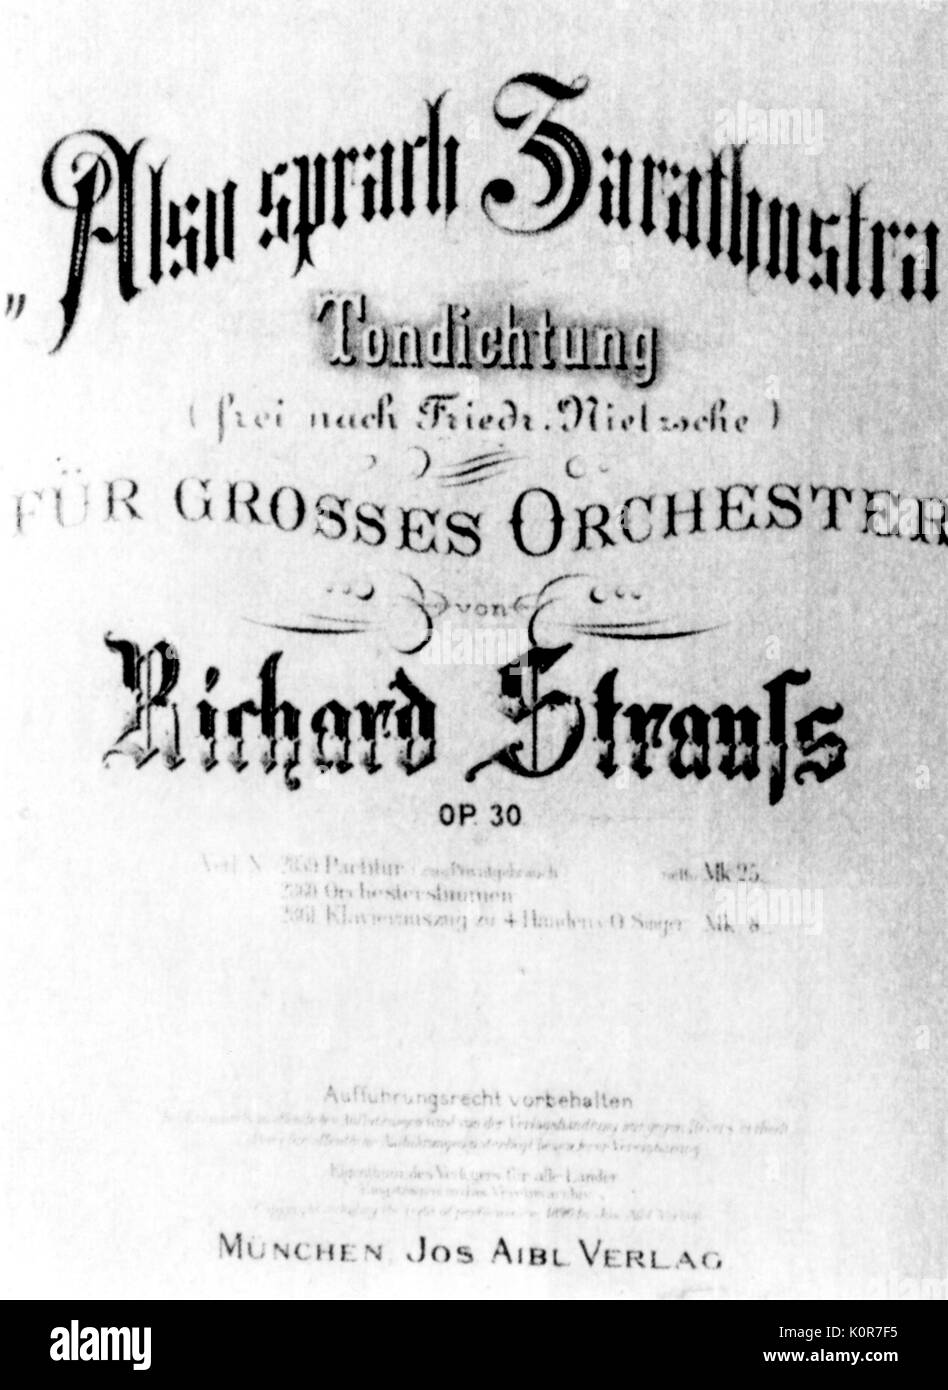 Richard Strauss - title page of the German composer 's tone poem (or symphonic poem) 'Also Sprach Zarathustra'. Inspired by the book of the same title by Friedrich Nietzsche. RS: 11 June 1864 - 8 September 1949. Stock Photo